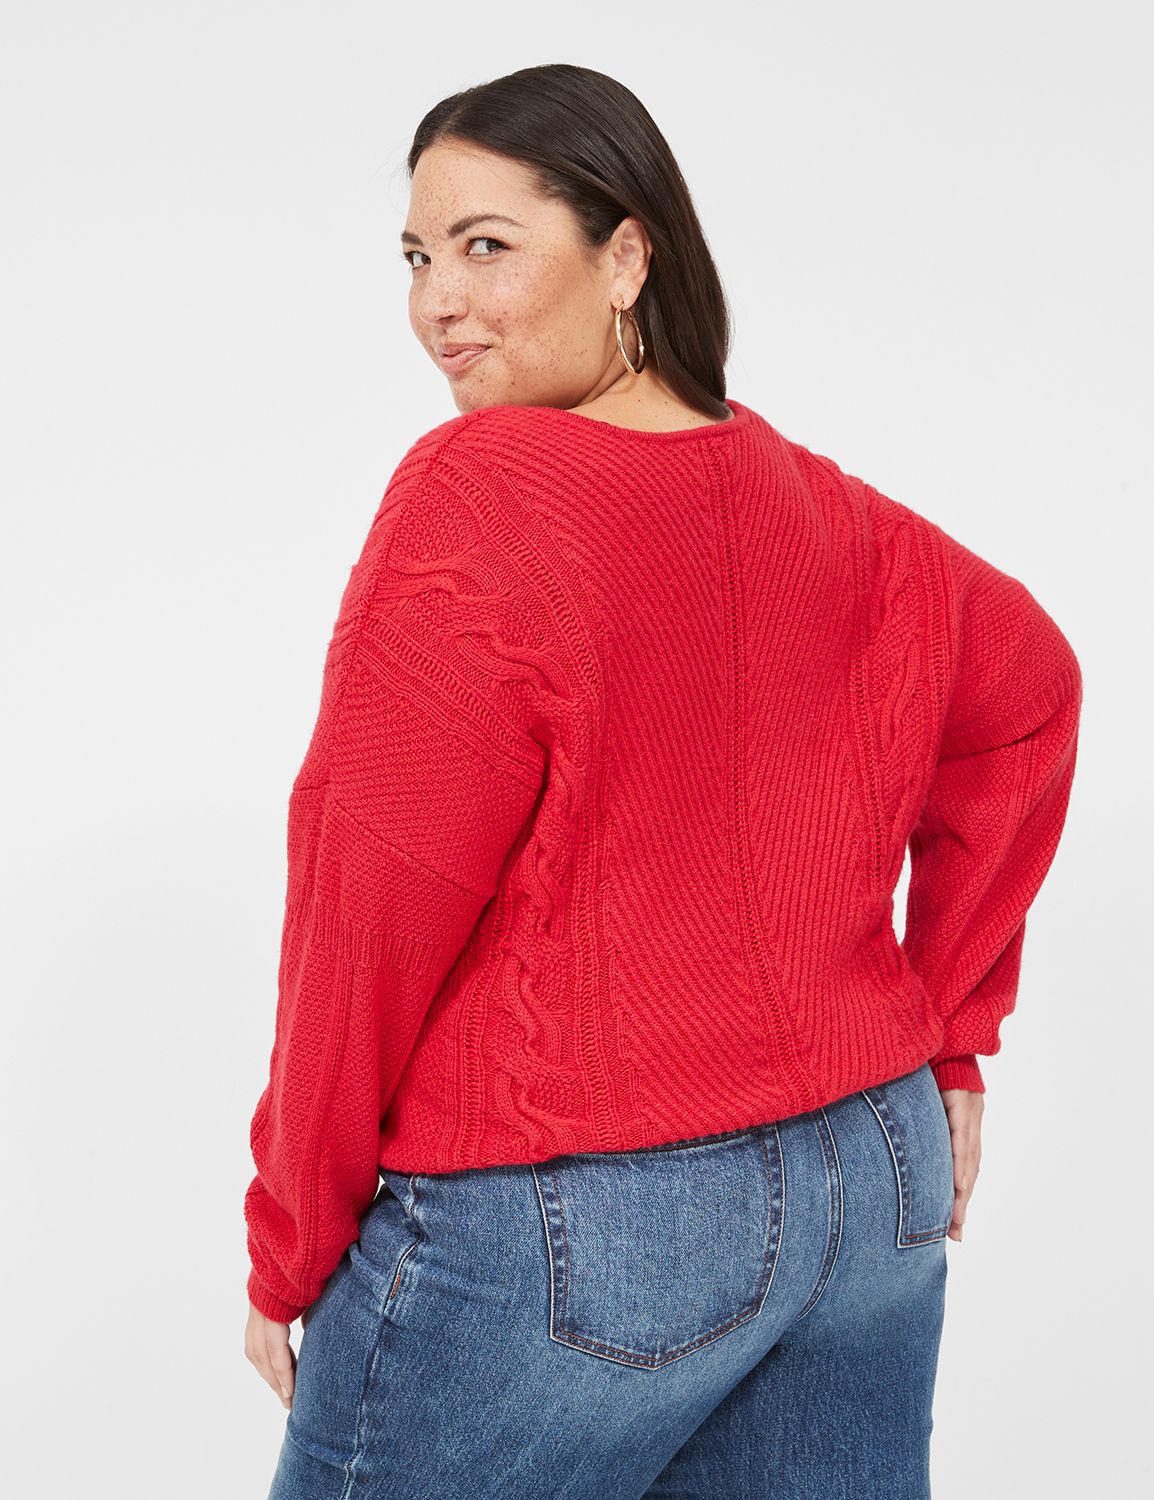 Classic Long Sleeve V Neck Cable Sw | LaneBryant